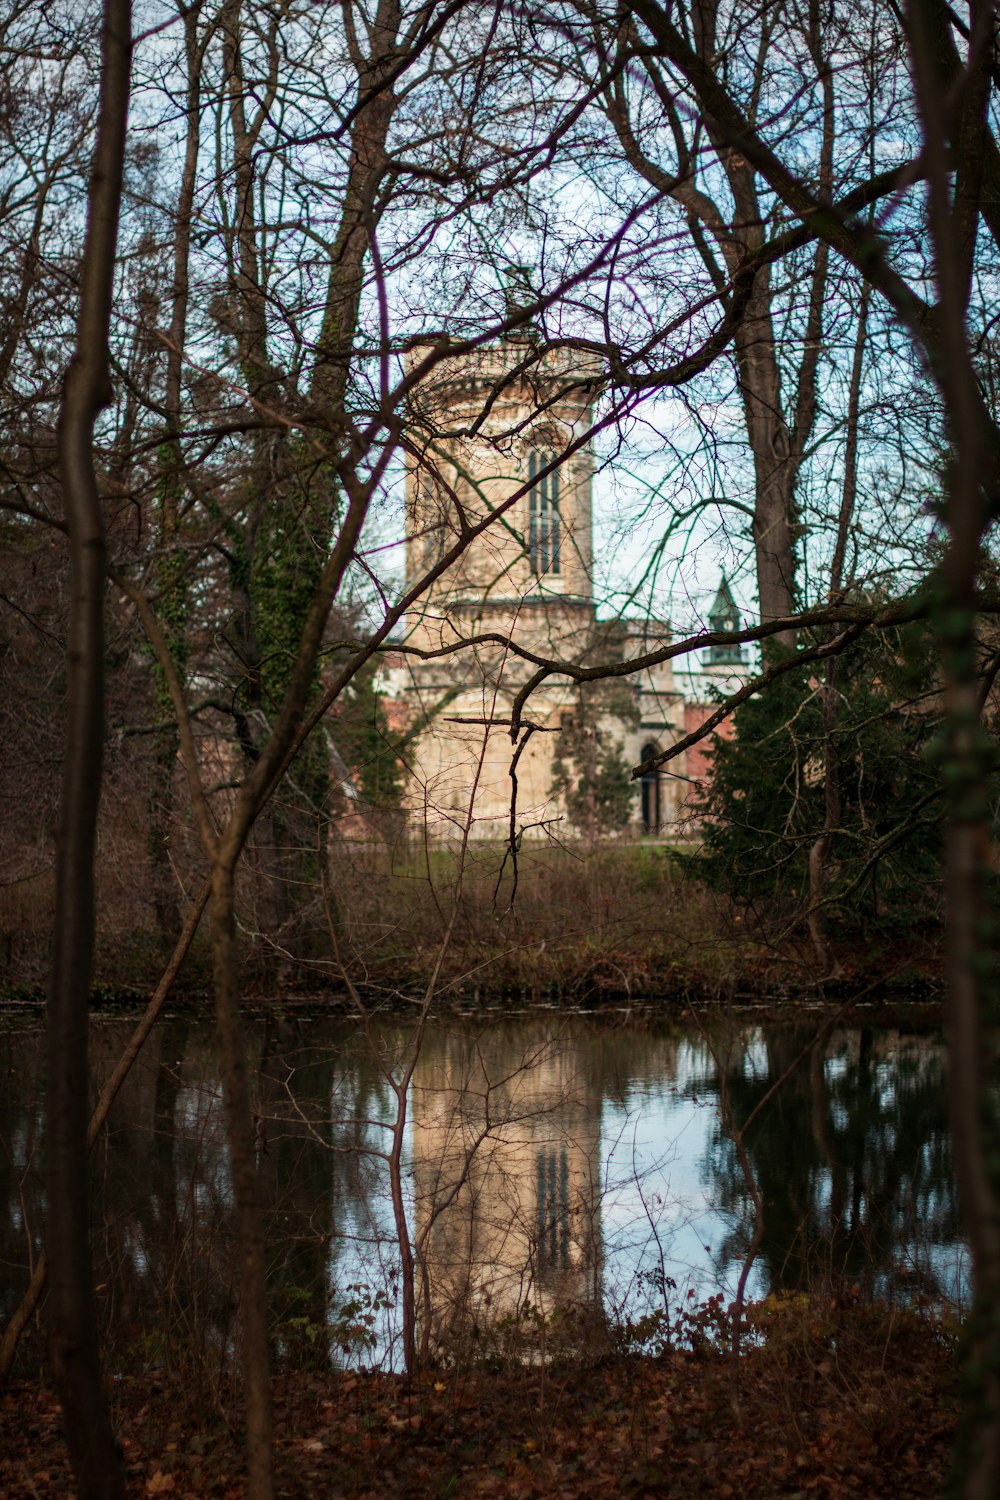 a building with a clock tower in the middle of a forest